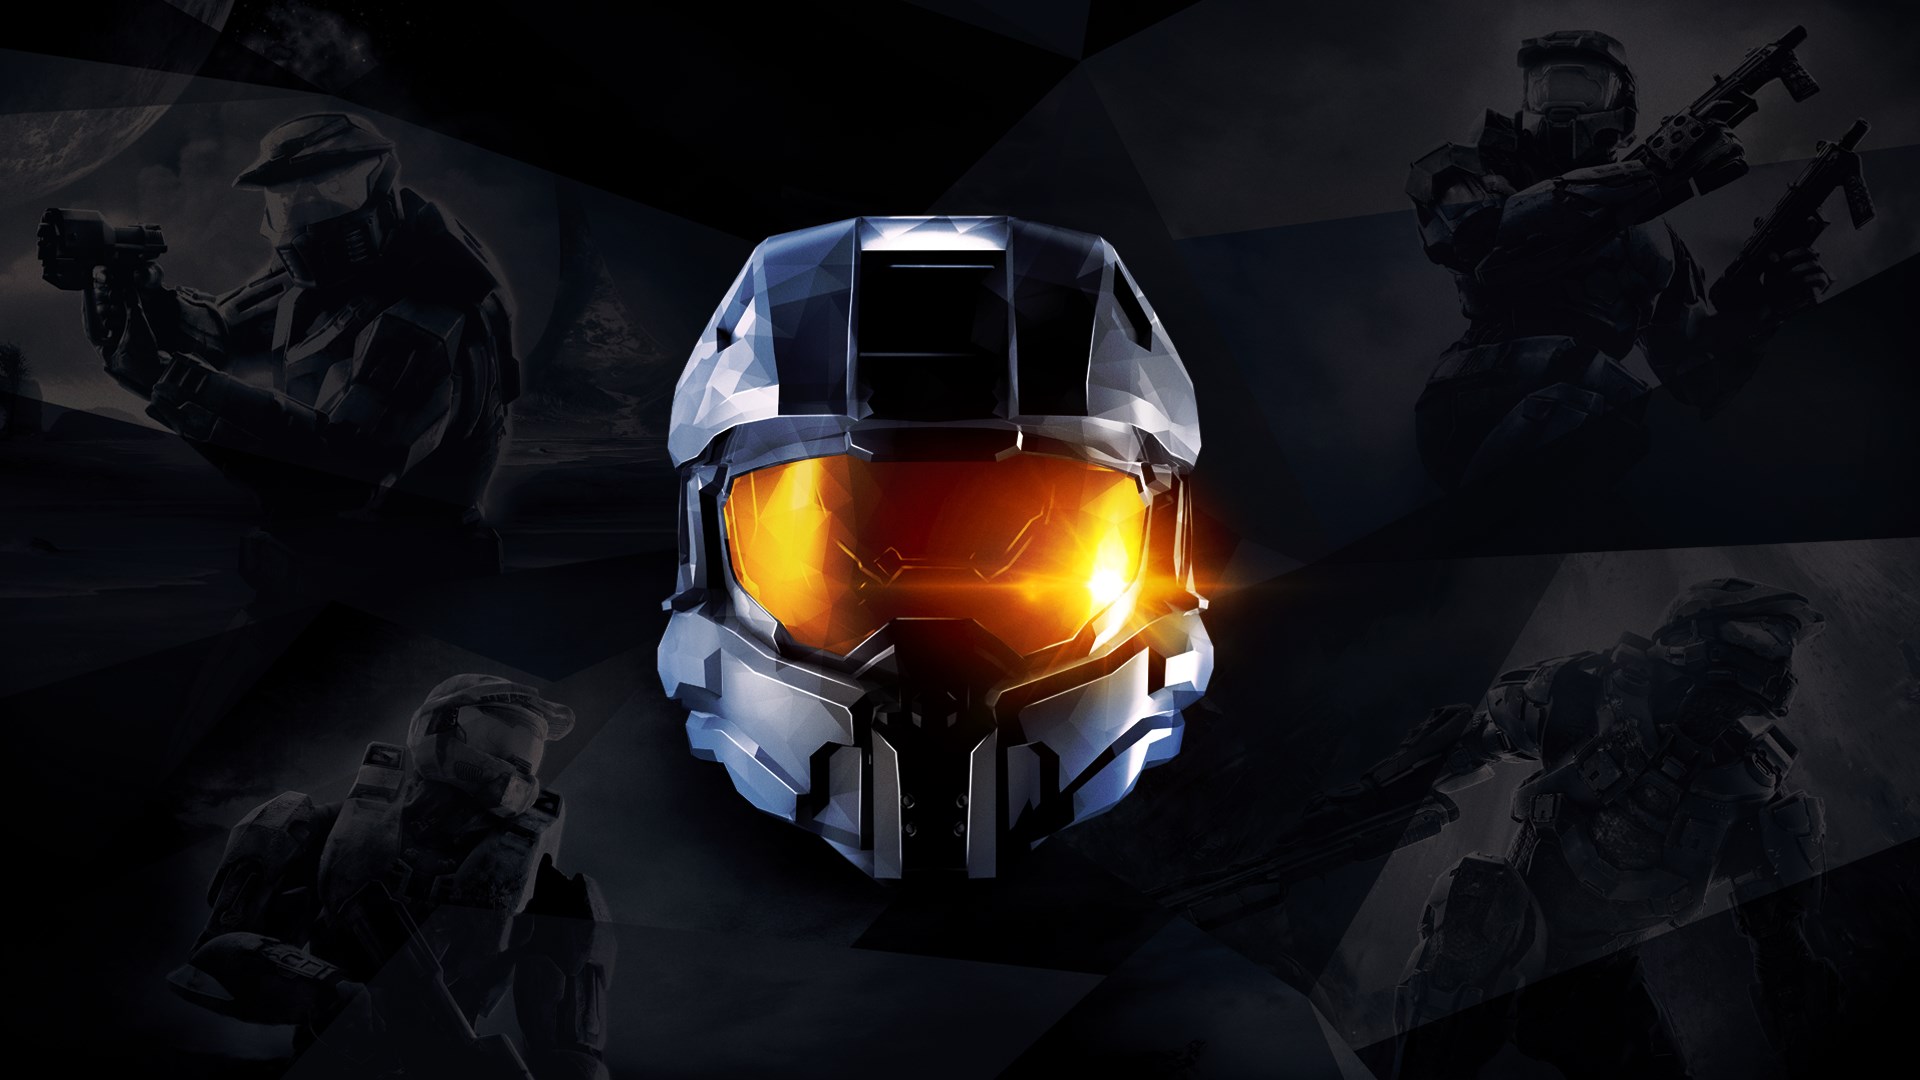 halo the master chief collection microsoft store